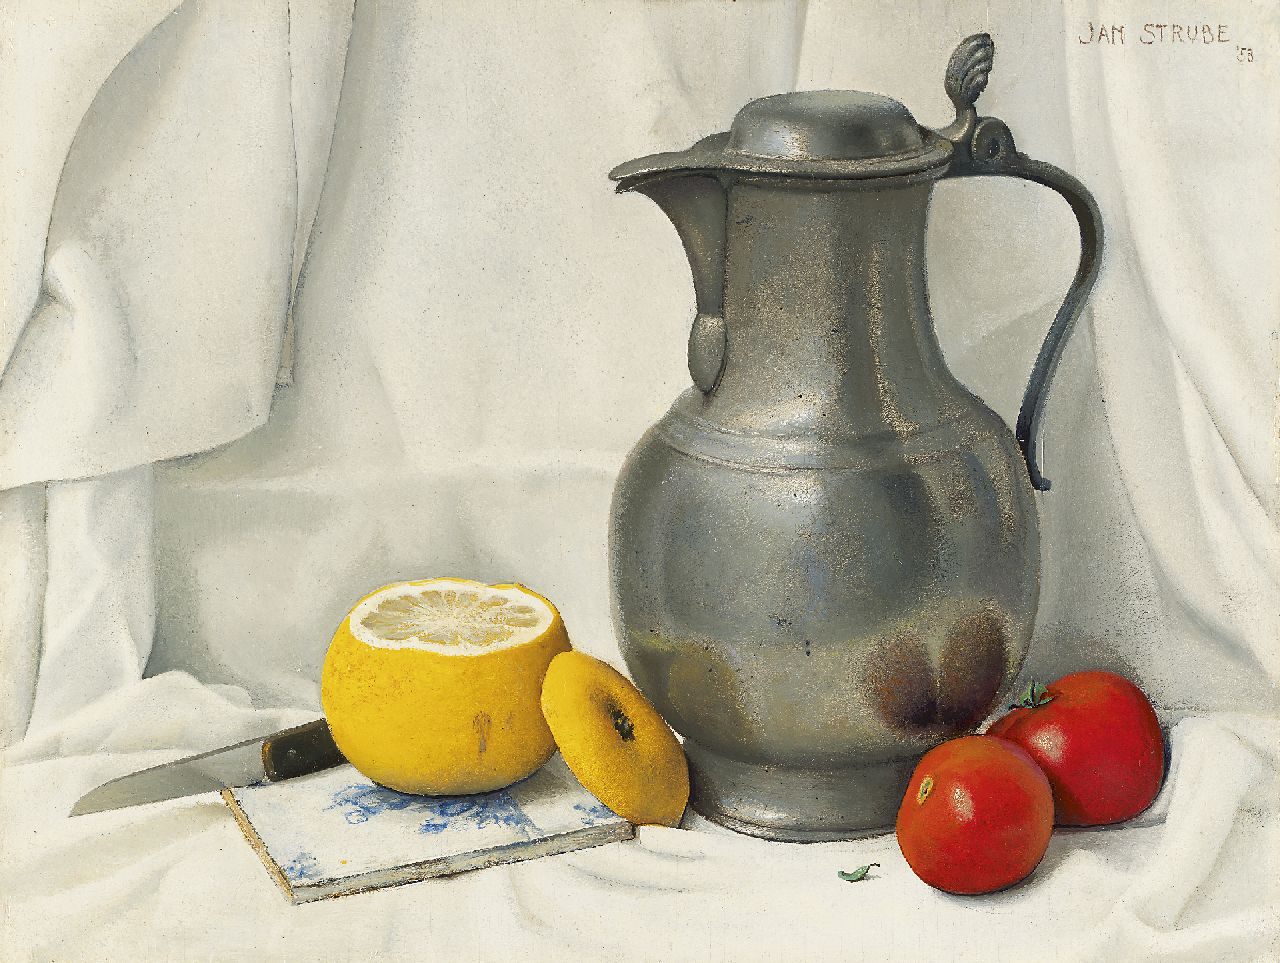 Strube J.H.  | Johan Hendrik 'Jan' Strube | Paintings offered for sale | Still life with a tin jar, a lemon and tomatoes, oil on panel 31.1 x 40.8 cm, signed u.r. and dated '53